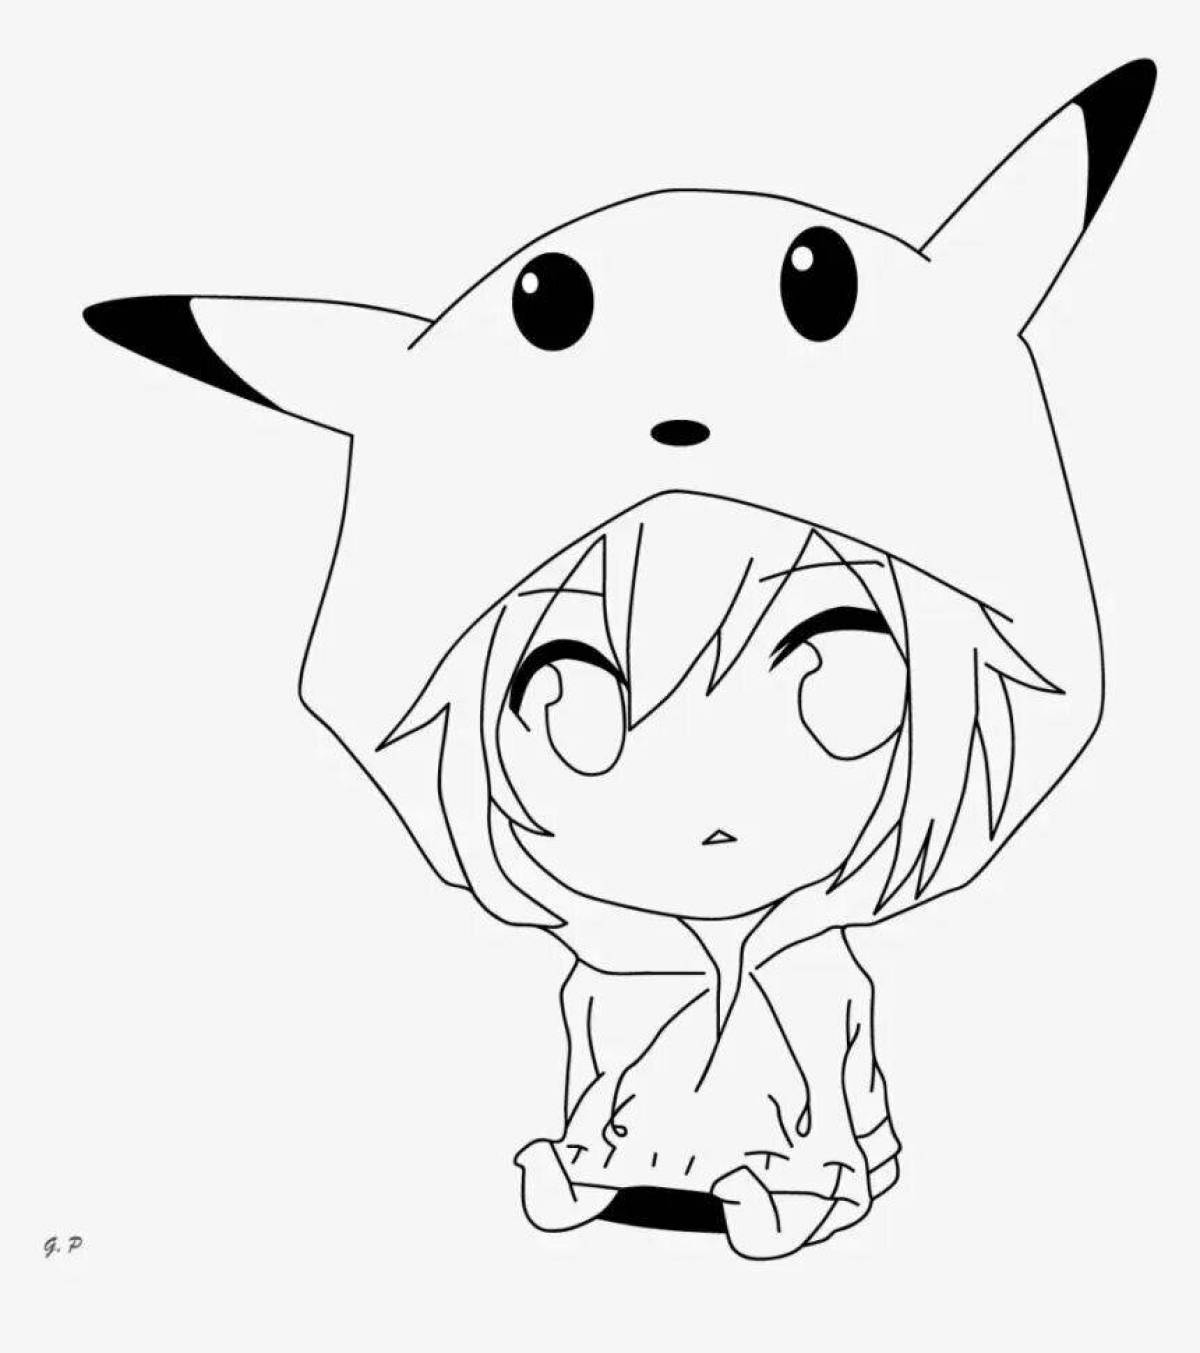 Creative anime sketch coloring page